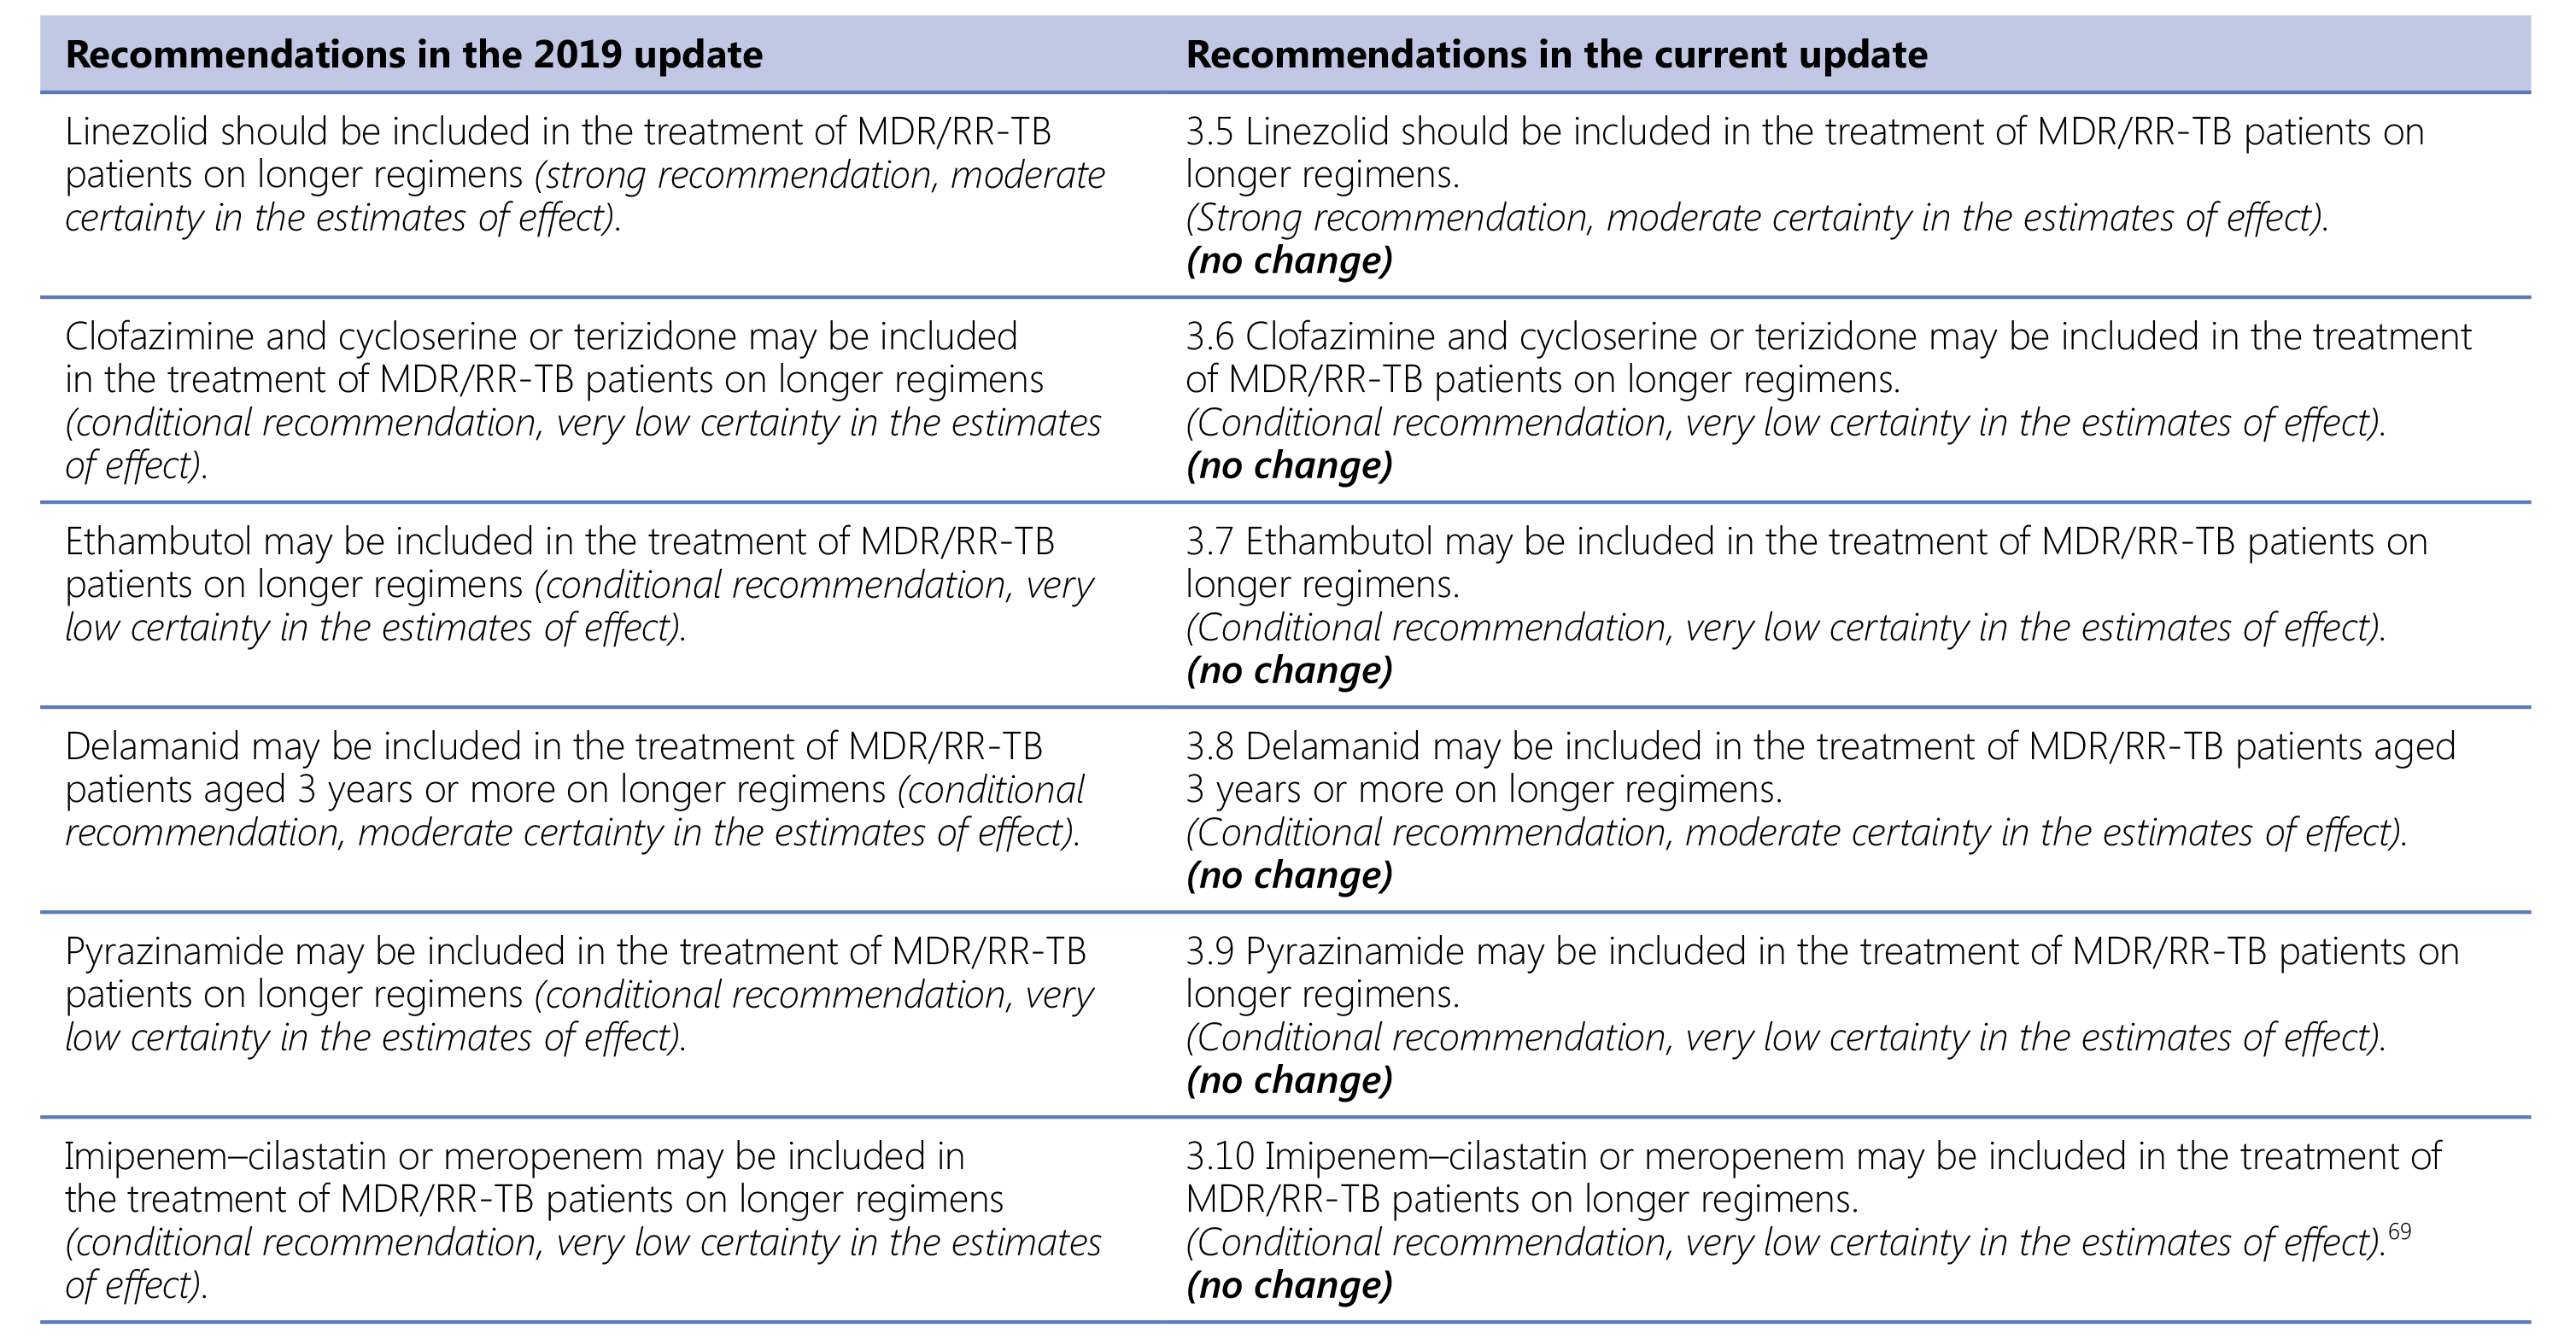 Recommendations in the 2019 update